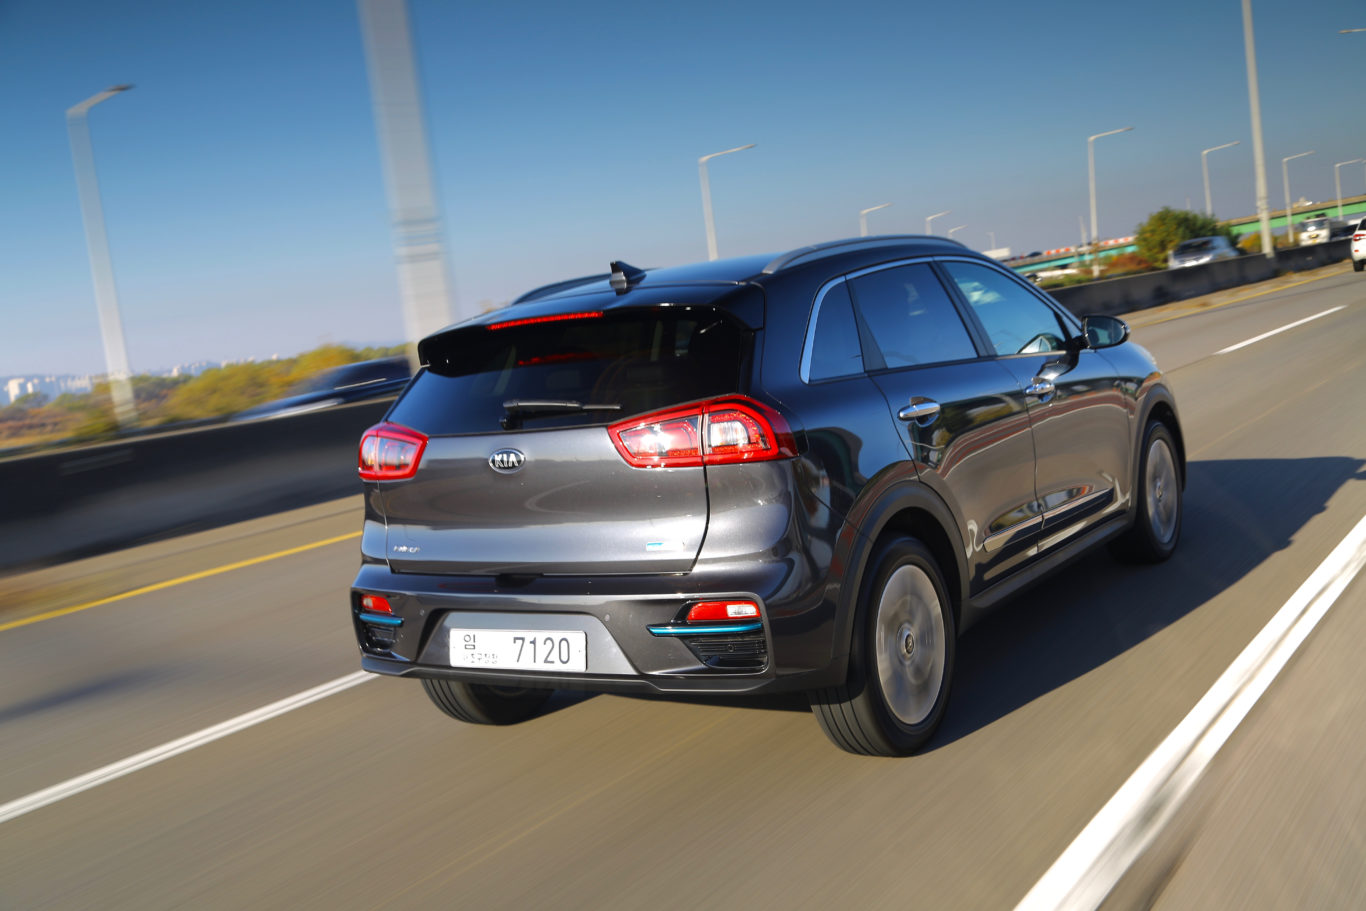 The e-Niro can travel a claimed 282 miles on a single charge